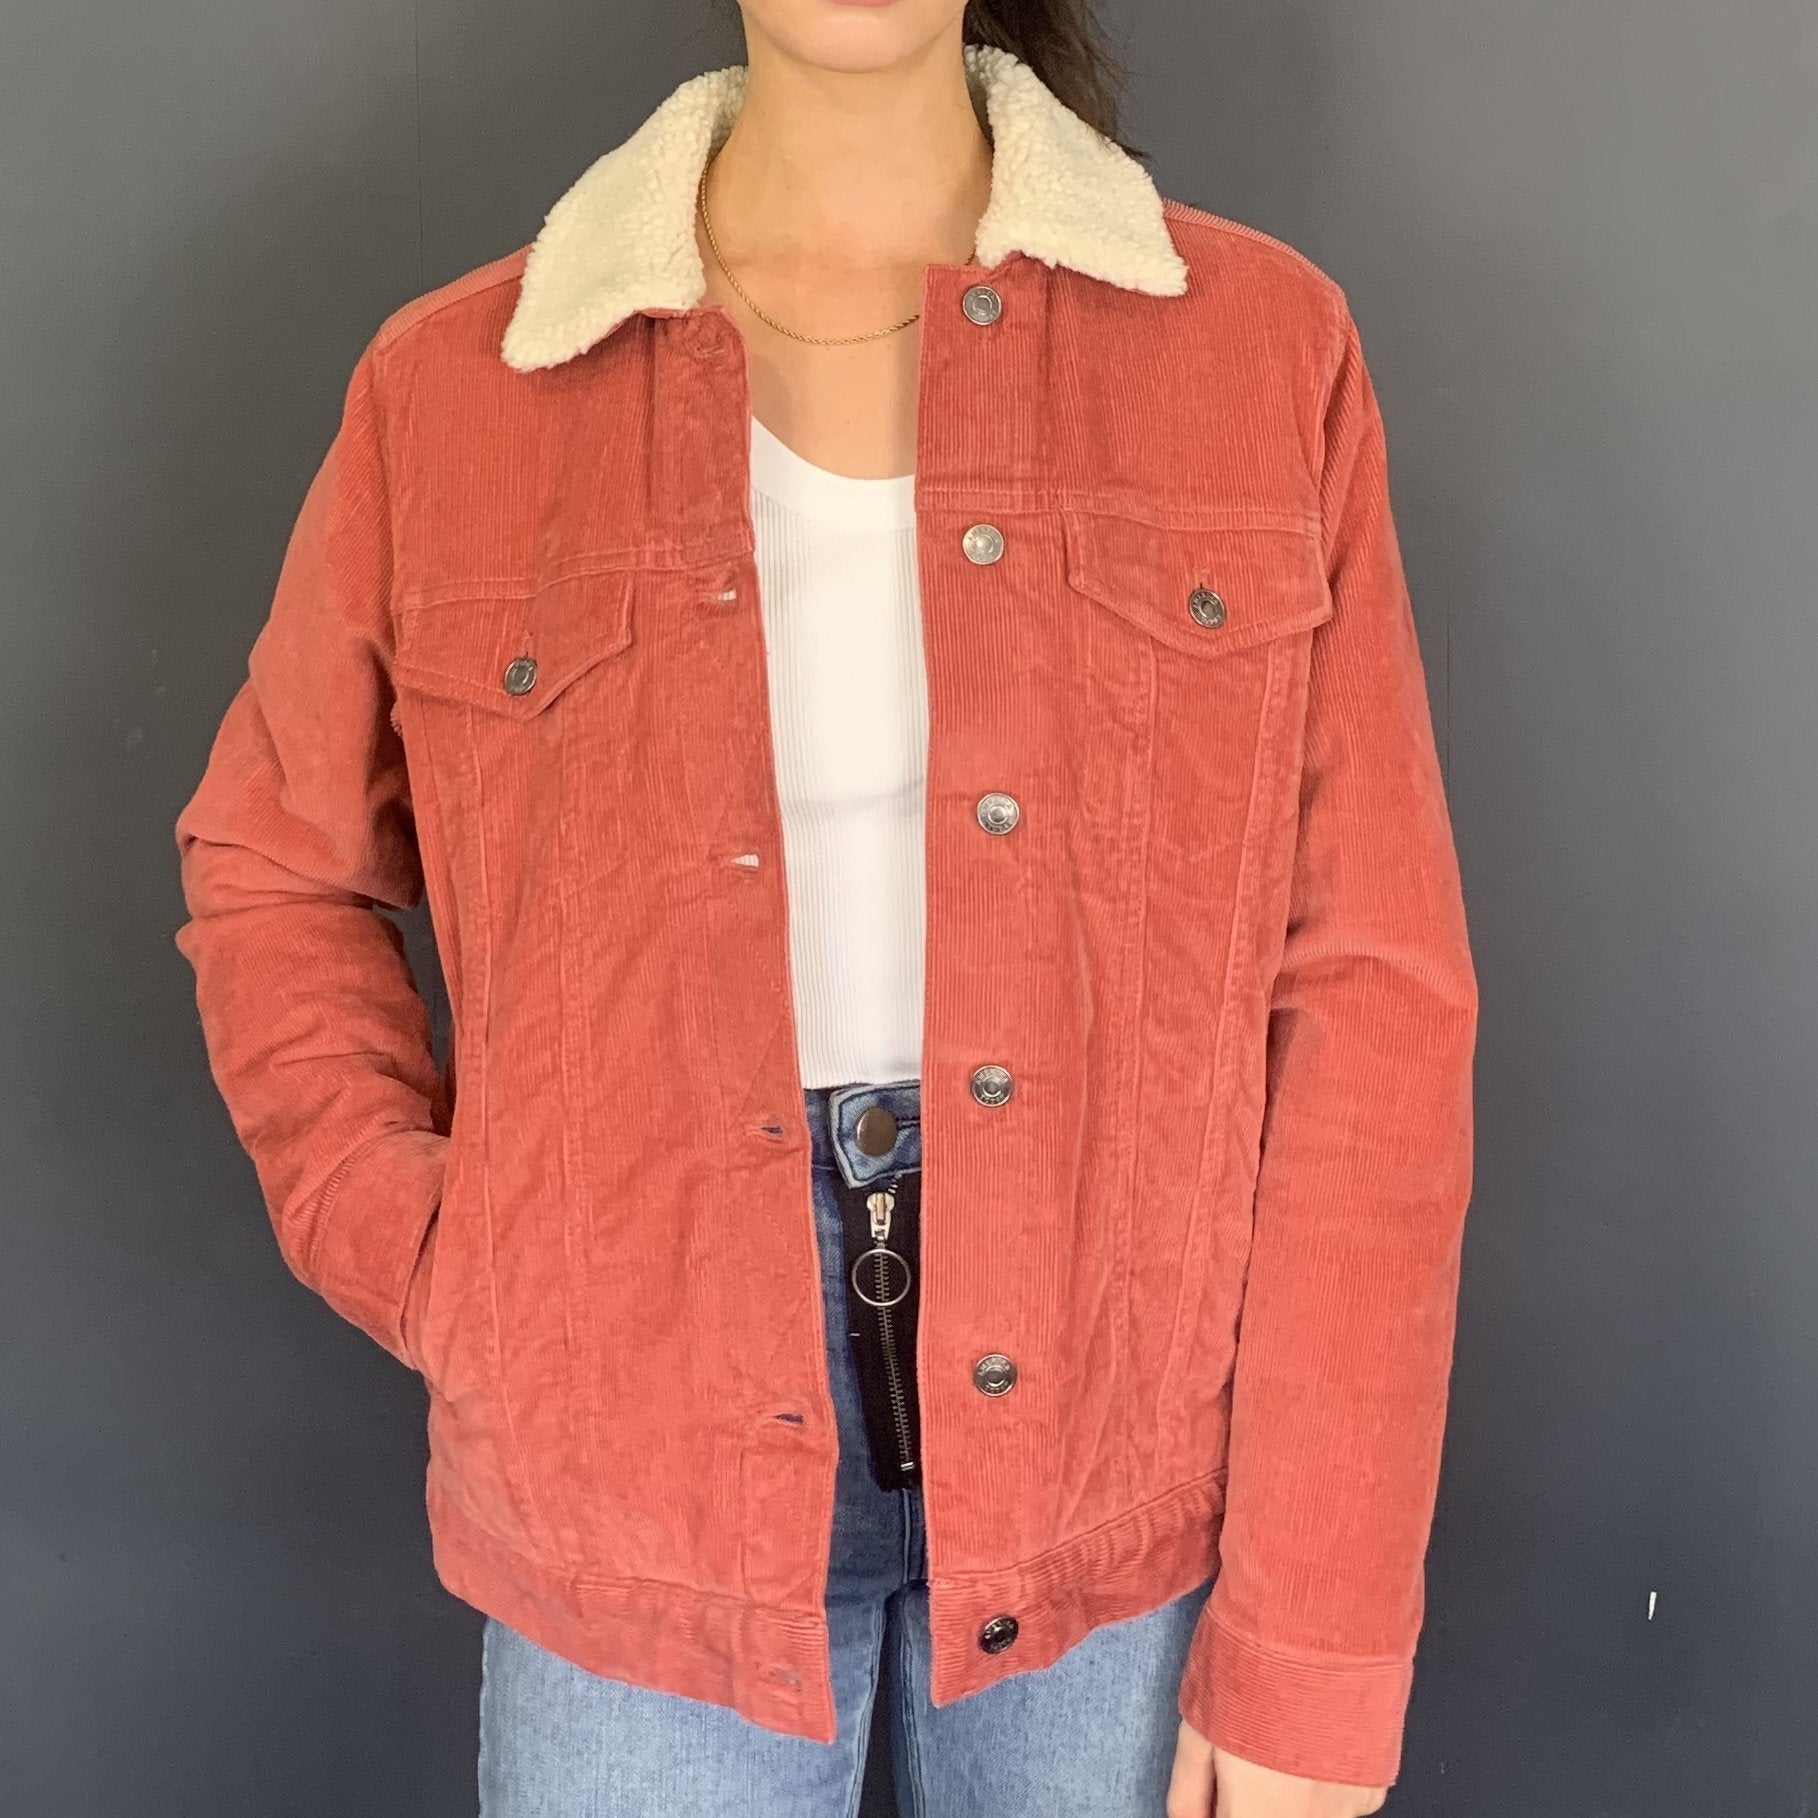 SUPER COOL 70’S INSPIRED CORDUROY JACKET - WOMEN'S Small/Medium - Vintique Clothing